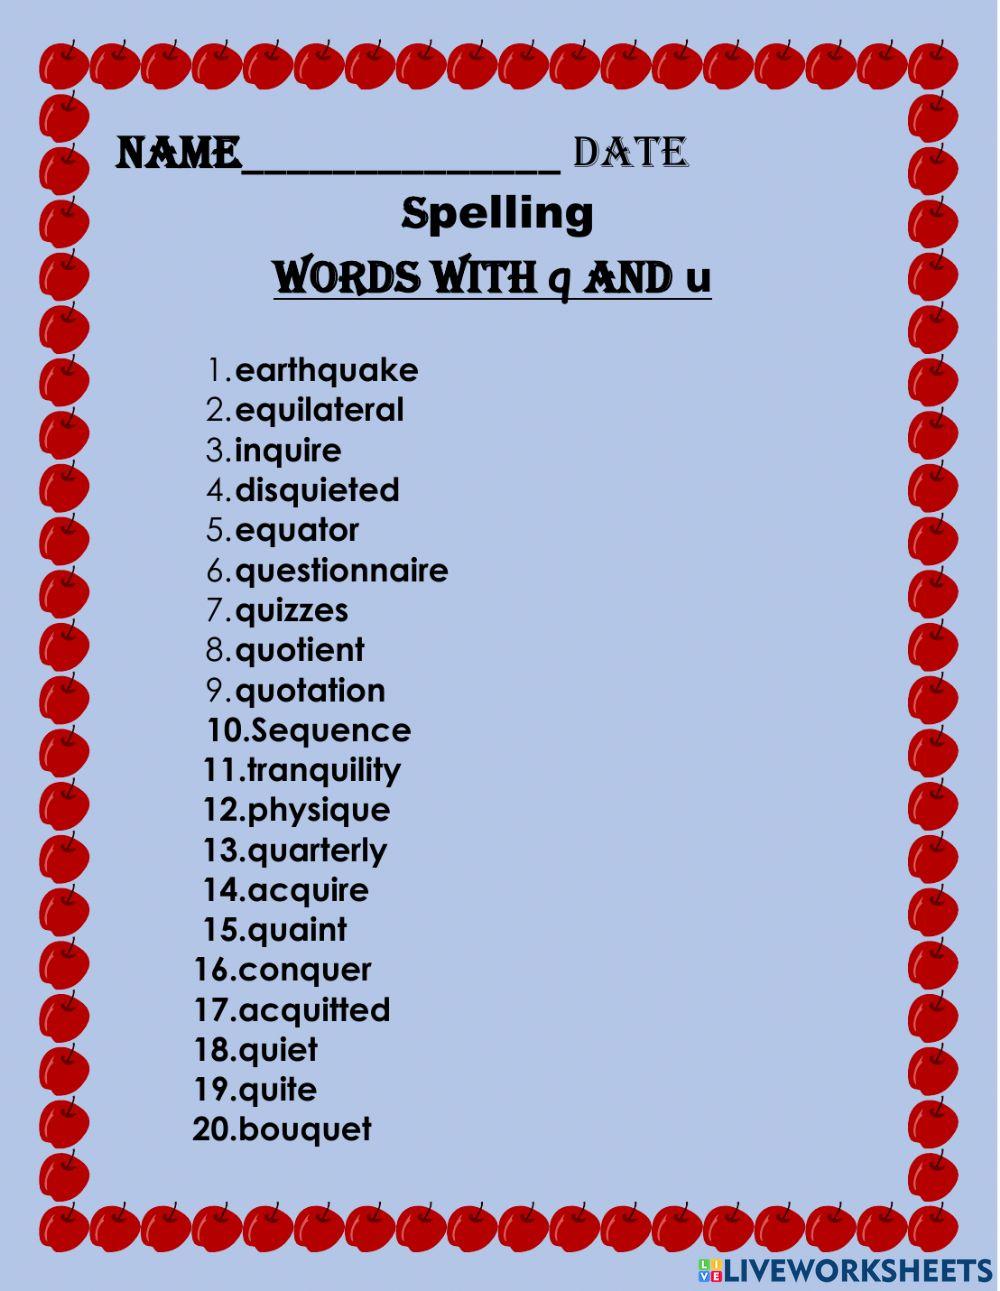 Spelling Words with qu